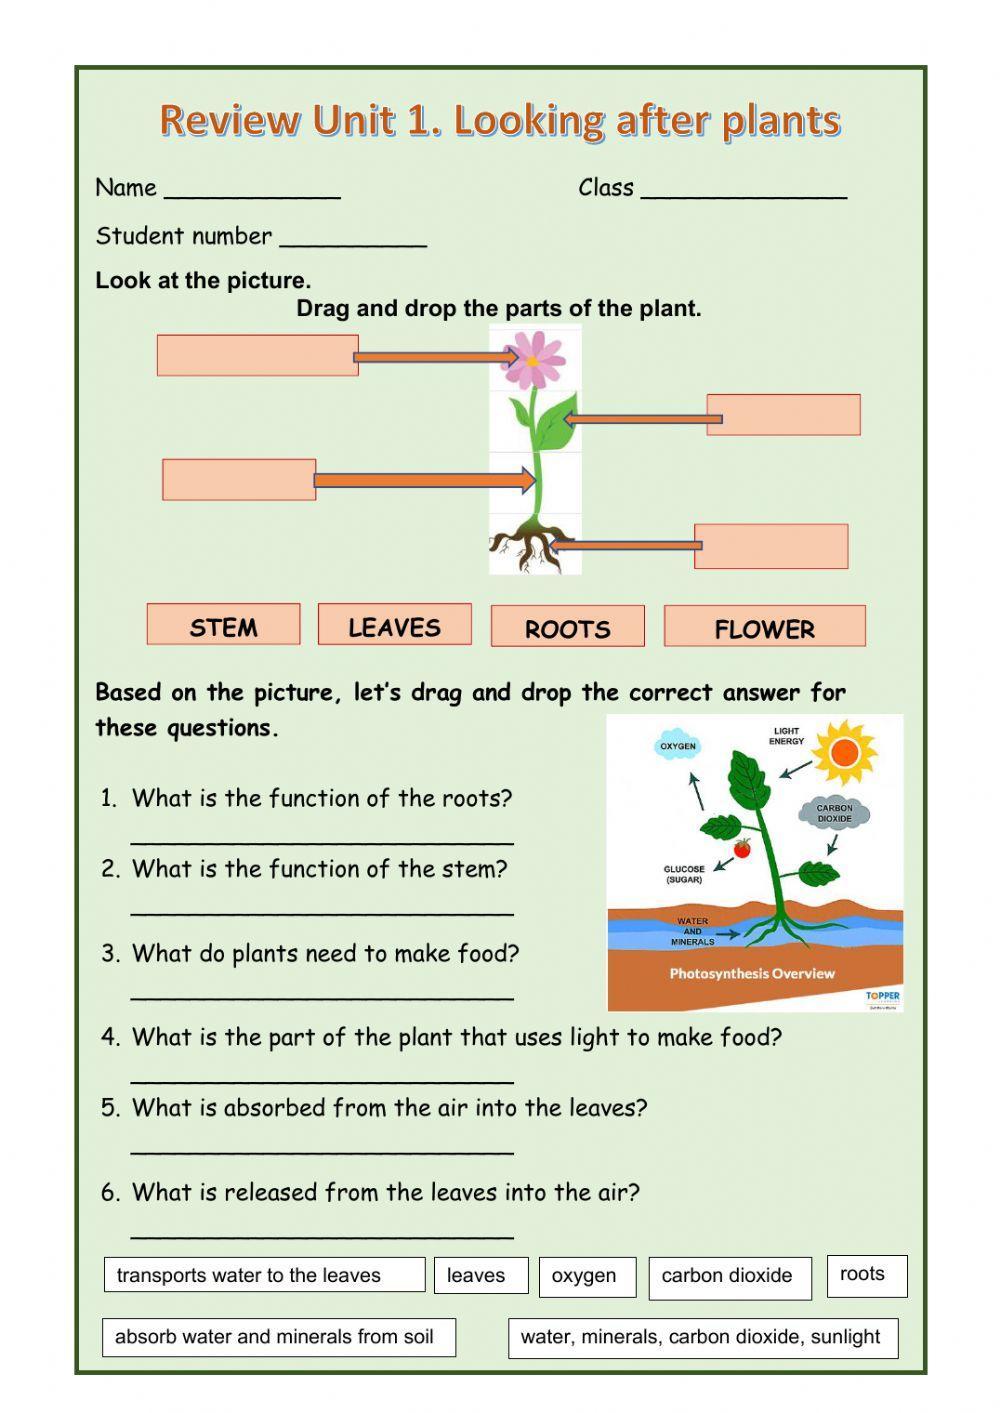 Plants and their parts